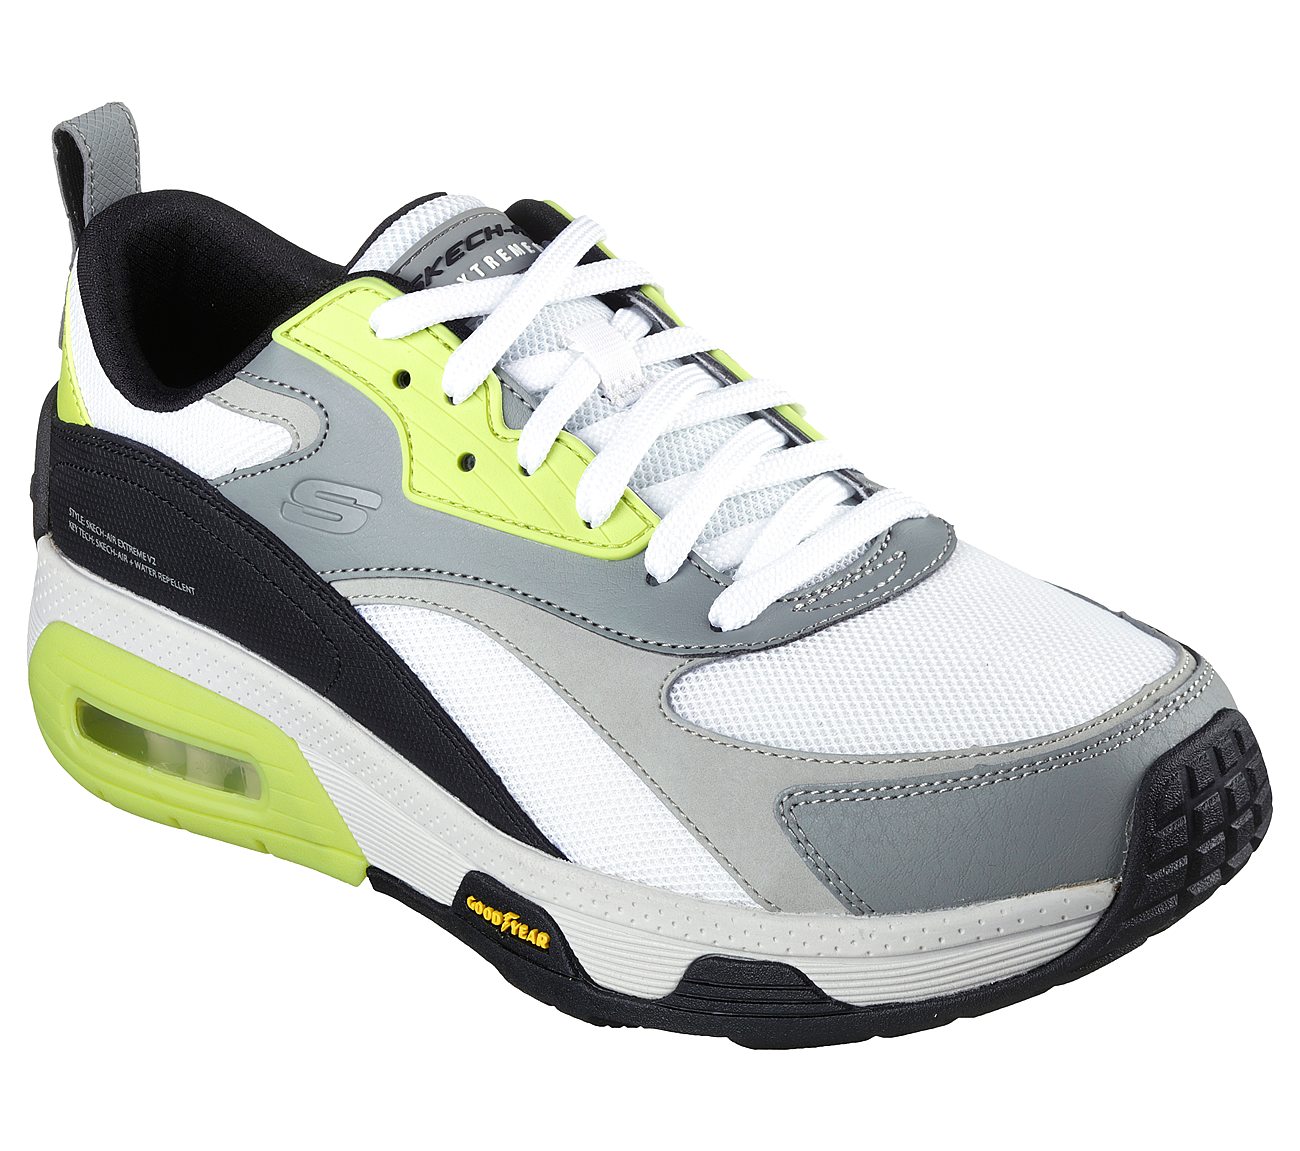 Discover 91+ skechers air shoes best